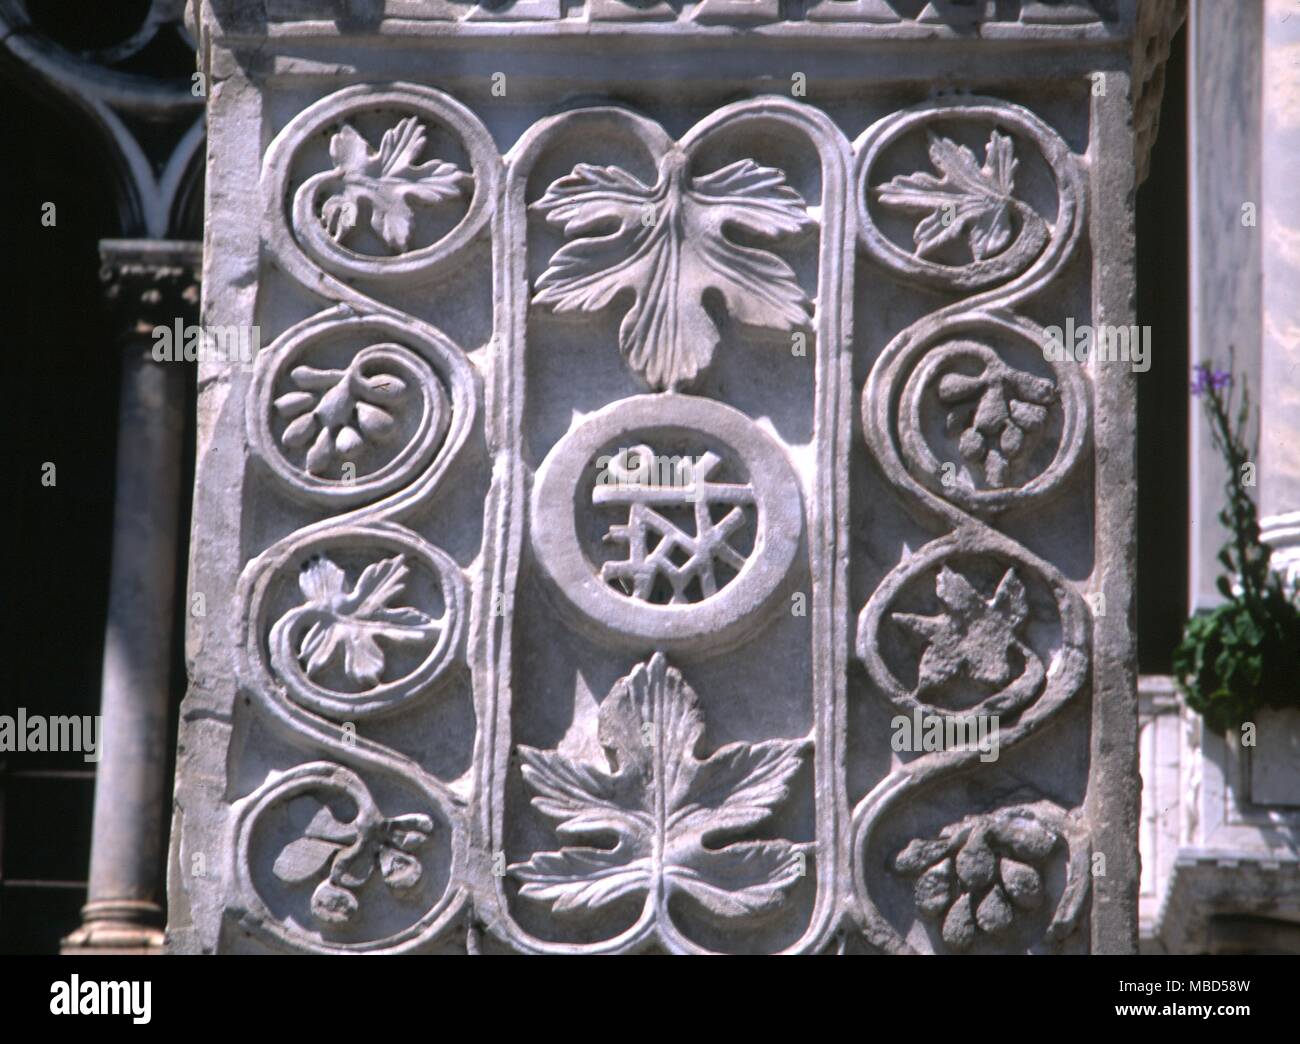 Symbols - Vine leaves. Vineleaves and monogram, probably brought to Venice from Constantinople. Now set in the wall of St. Marks. Italy Stock Photo